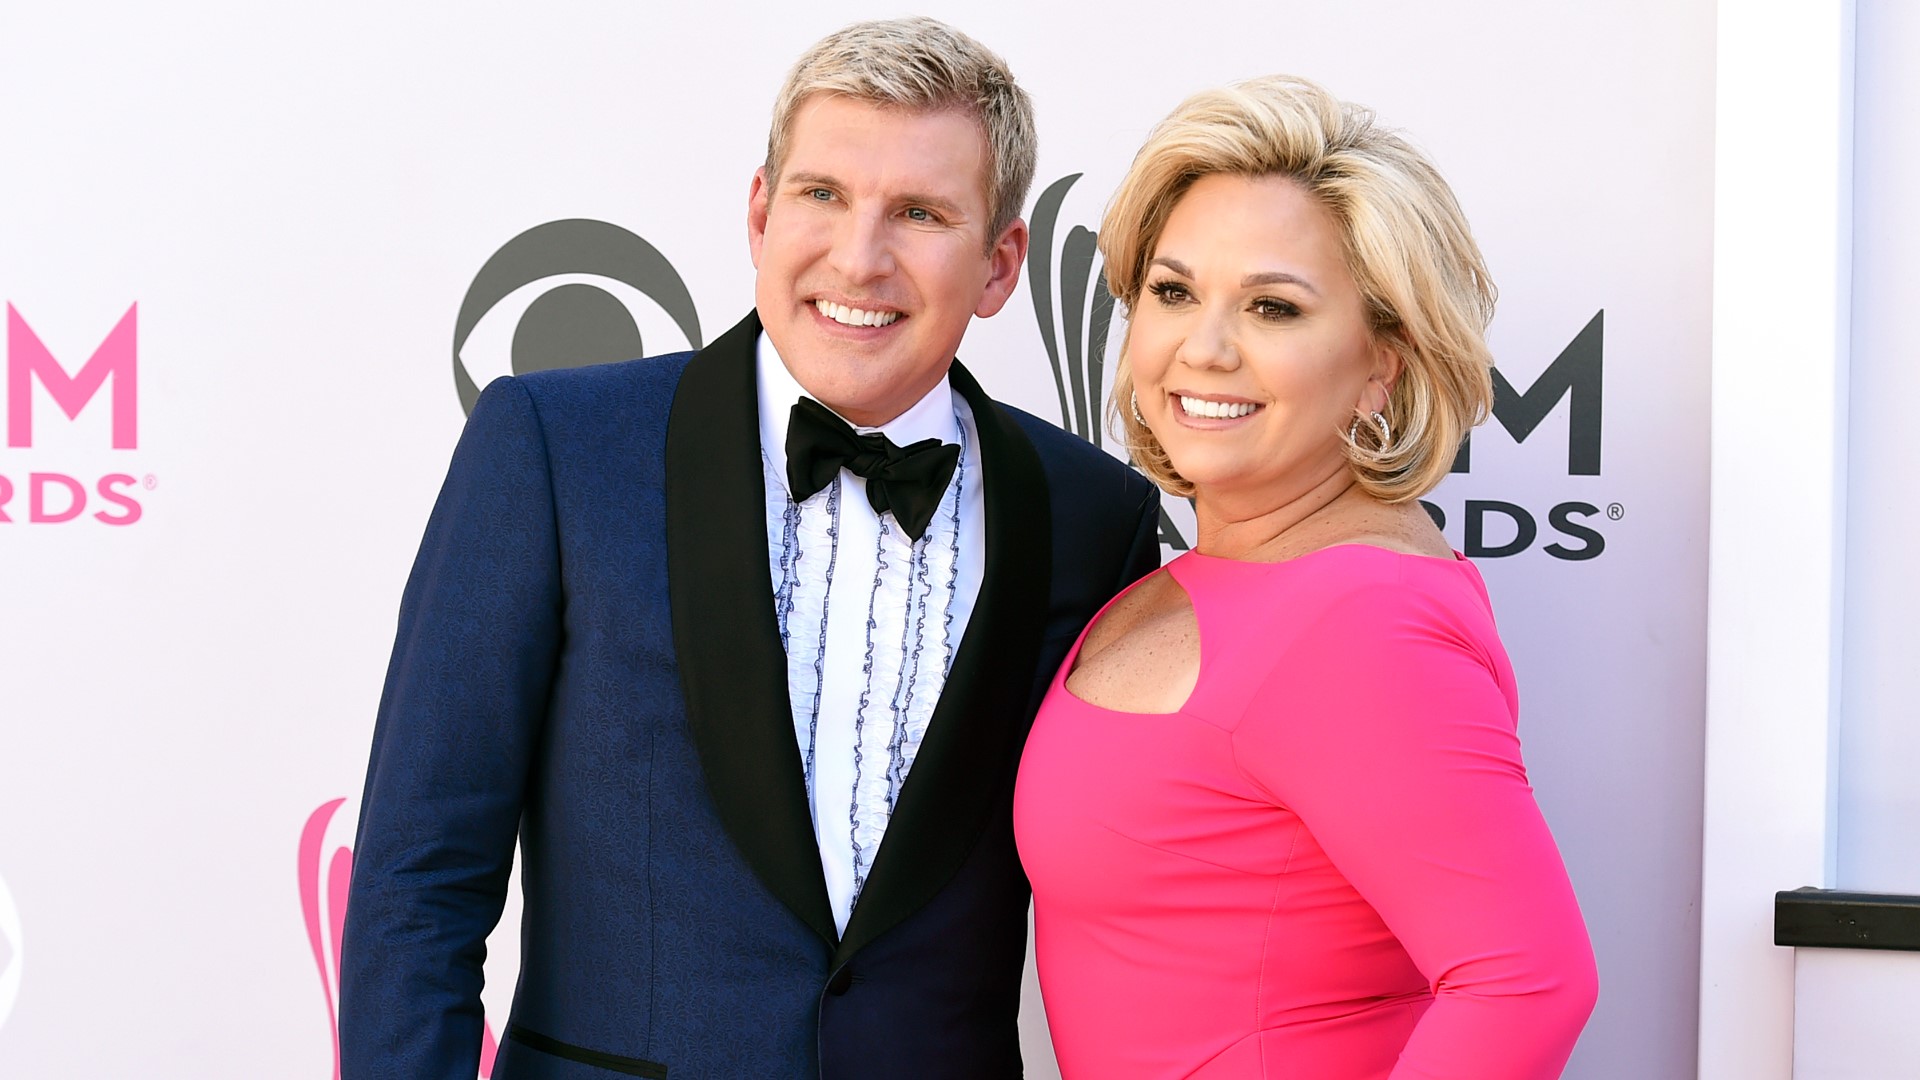 Reality TV stars Todd and Julie Chrisley were sentenced Monday to lengthy prison terms after being convicted earlier this year of bank fraud and tax evasion.